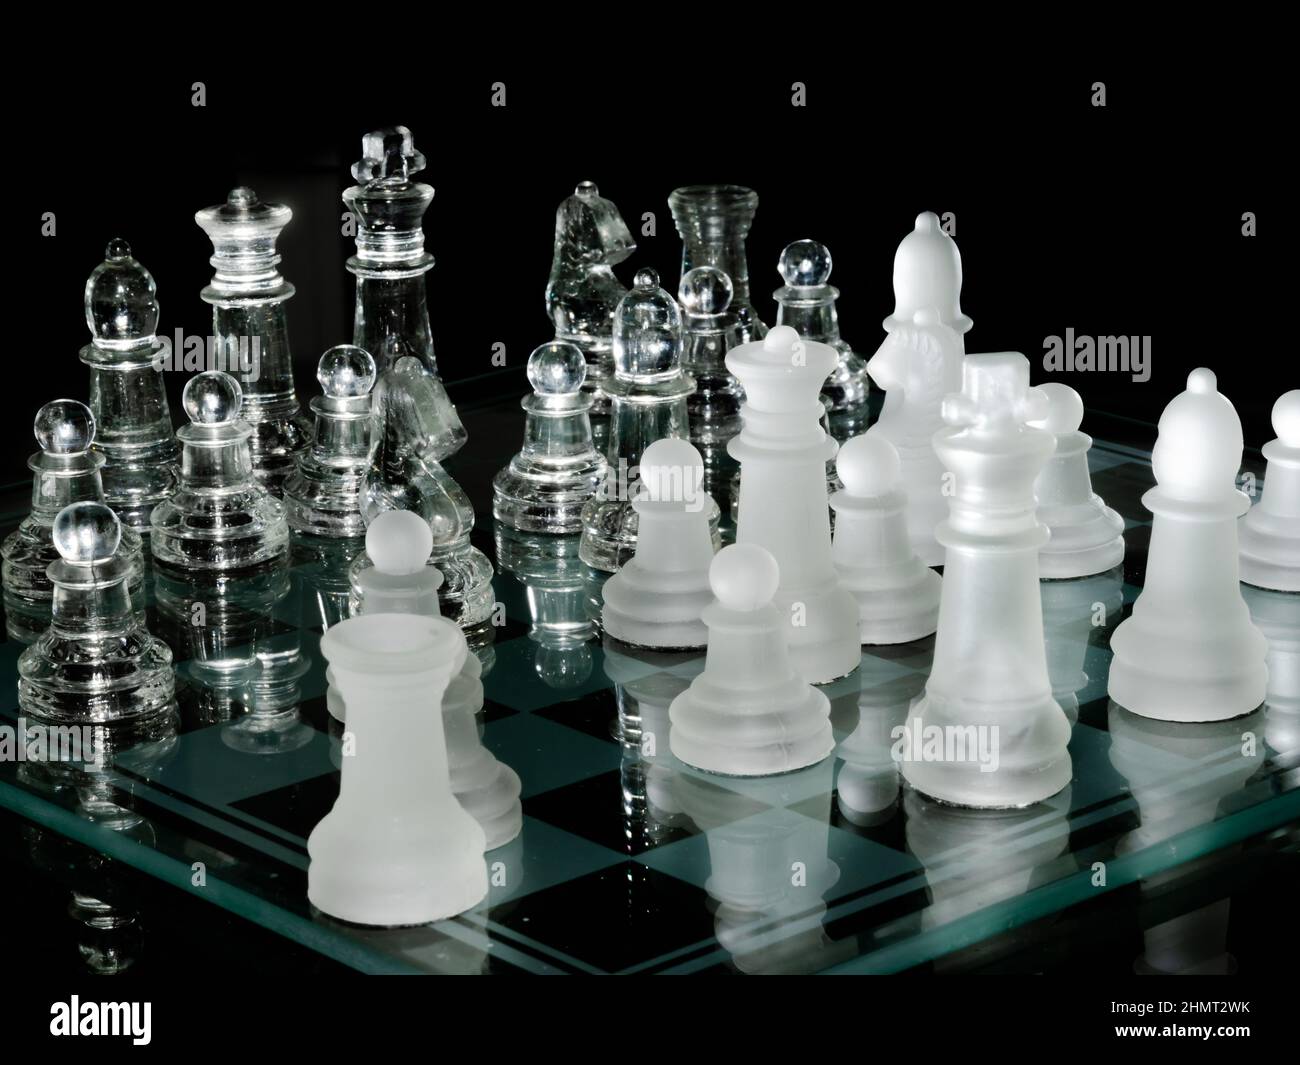 Chess set with glass material reflected. White pieces and transparent resin material reflected in the glass chess board. Black backgroud. Close up. Stock Photo